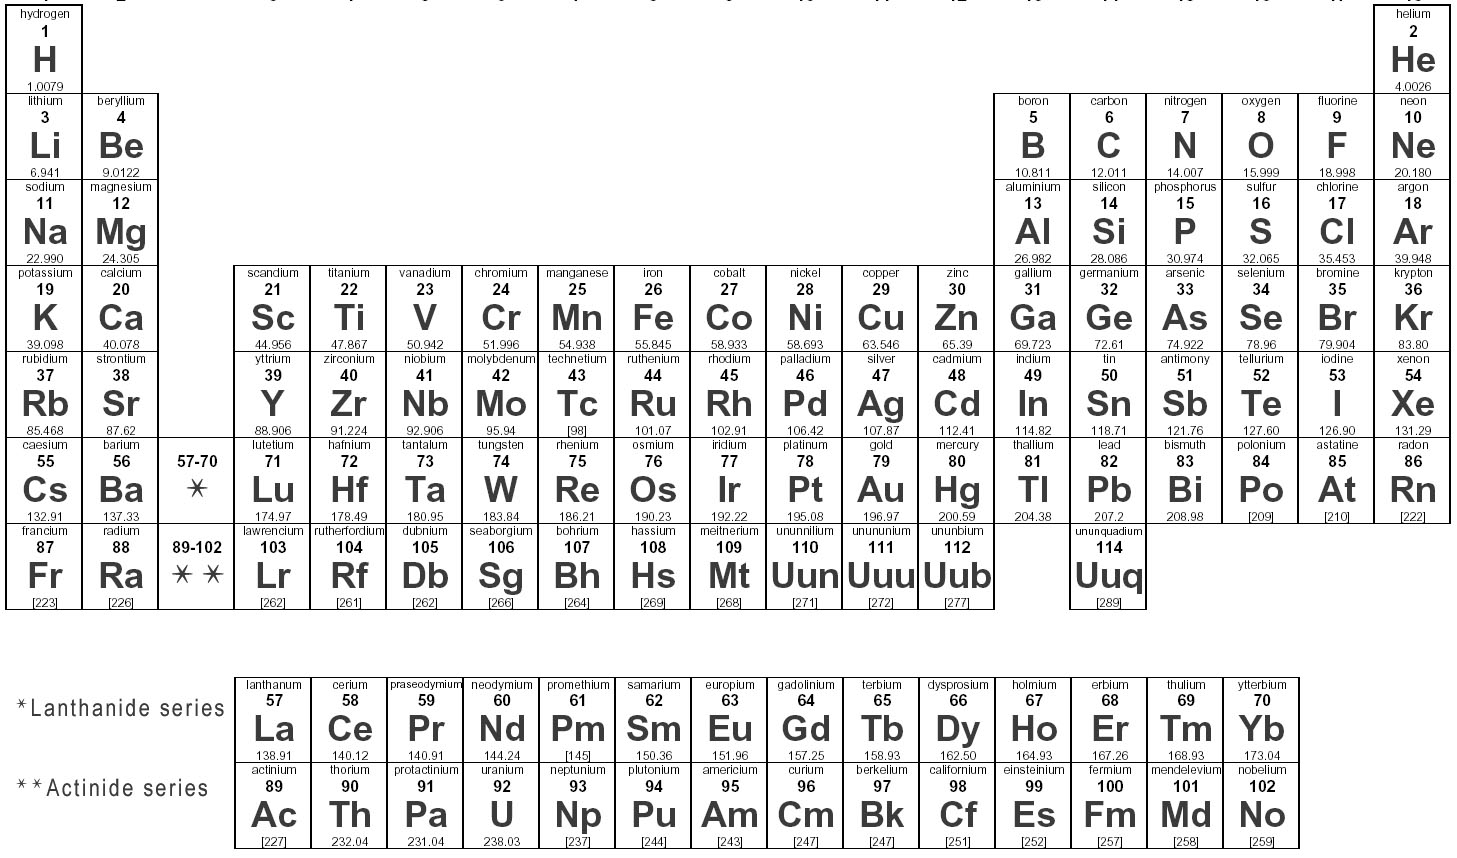 As Periodic Table of Elements